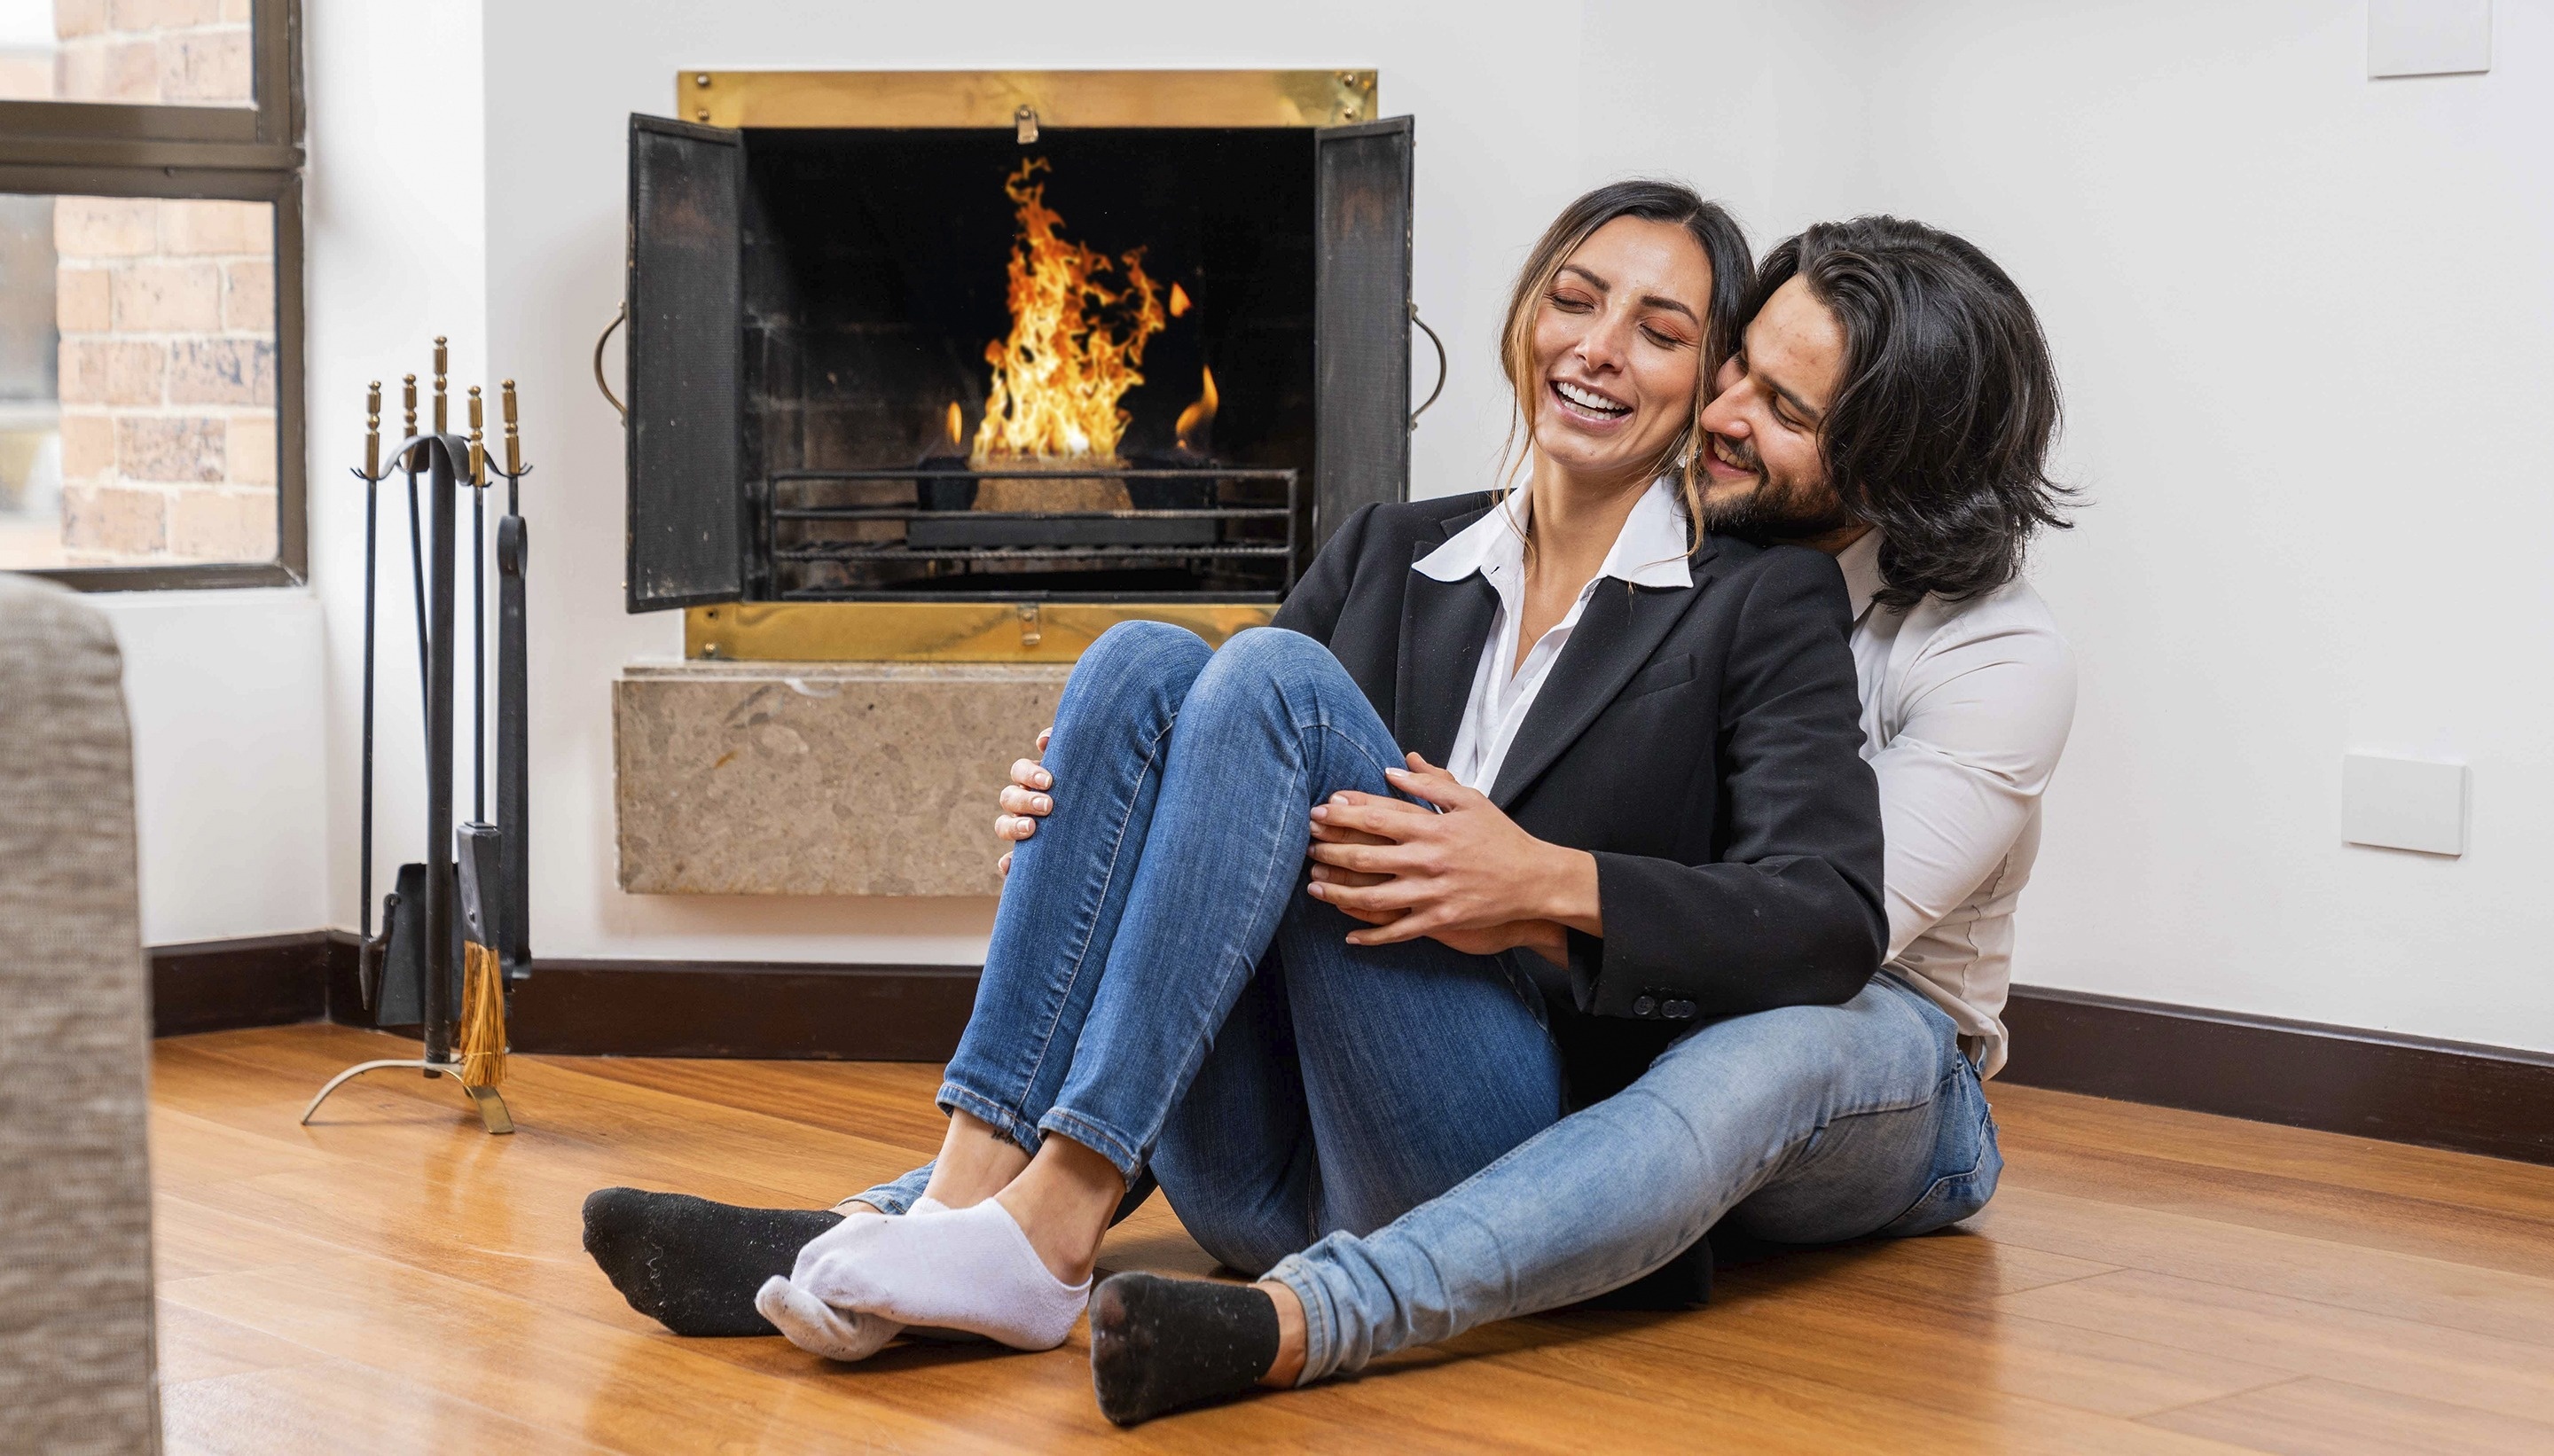 a man and woman sit on the floor in front of a fireplace